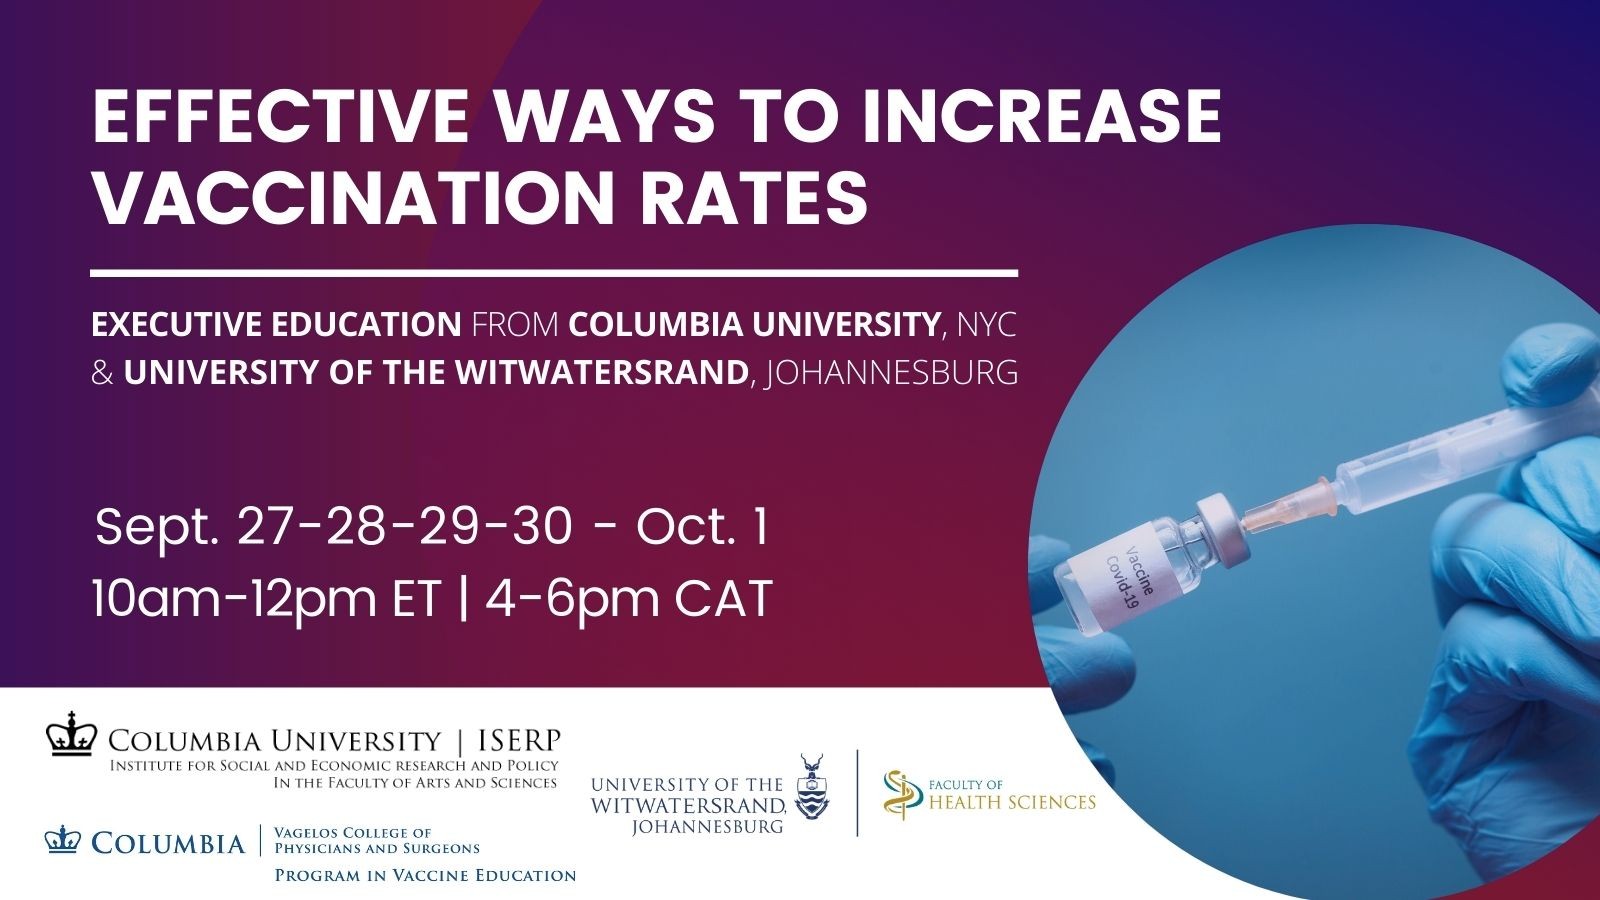 Event flier. Effective Ways to Increase Vaccination Rates Poster. White text on purple background. Featuring image of gloved hands holding vaccine syringe and COVID-19 vaccine vial on a blue background.